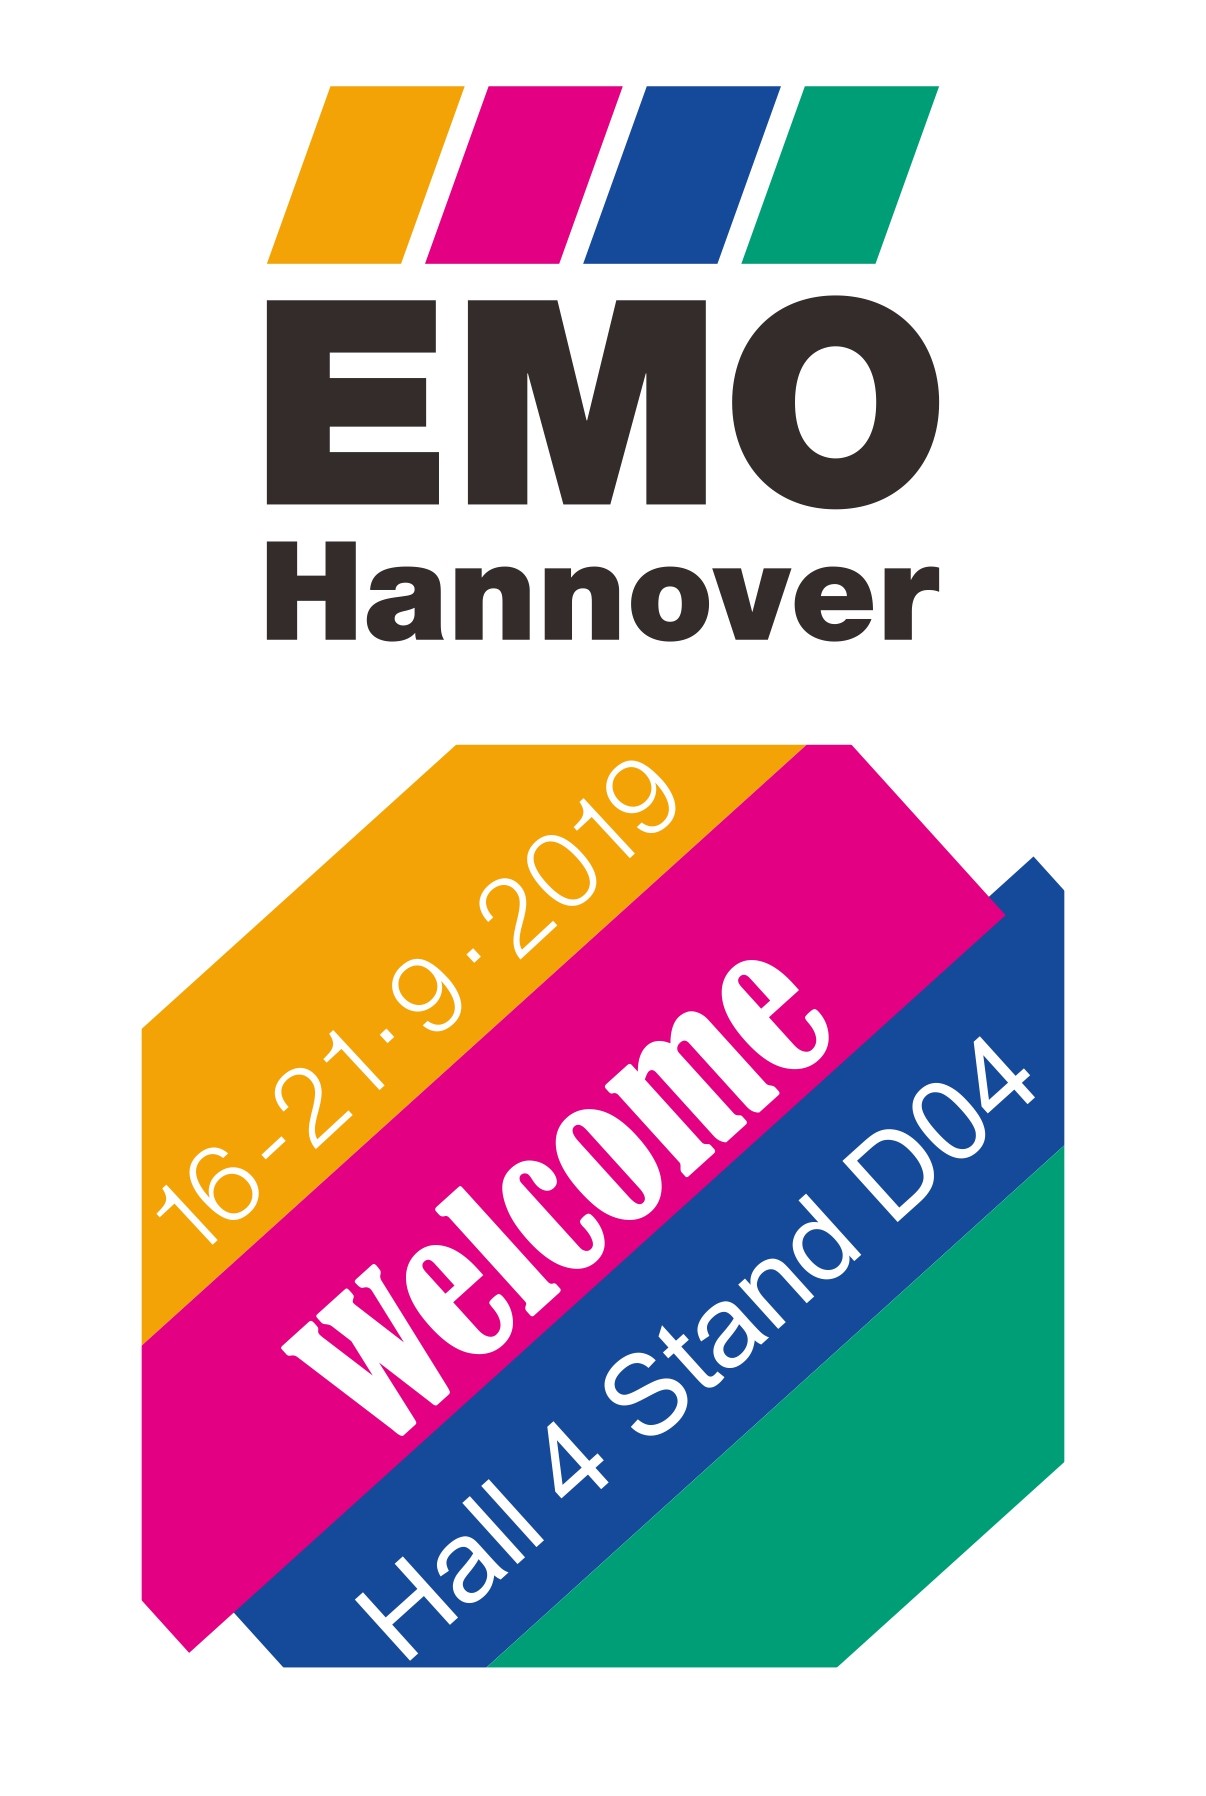 EMO Hannover 2019 with Echaintool from Taiwan